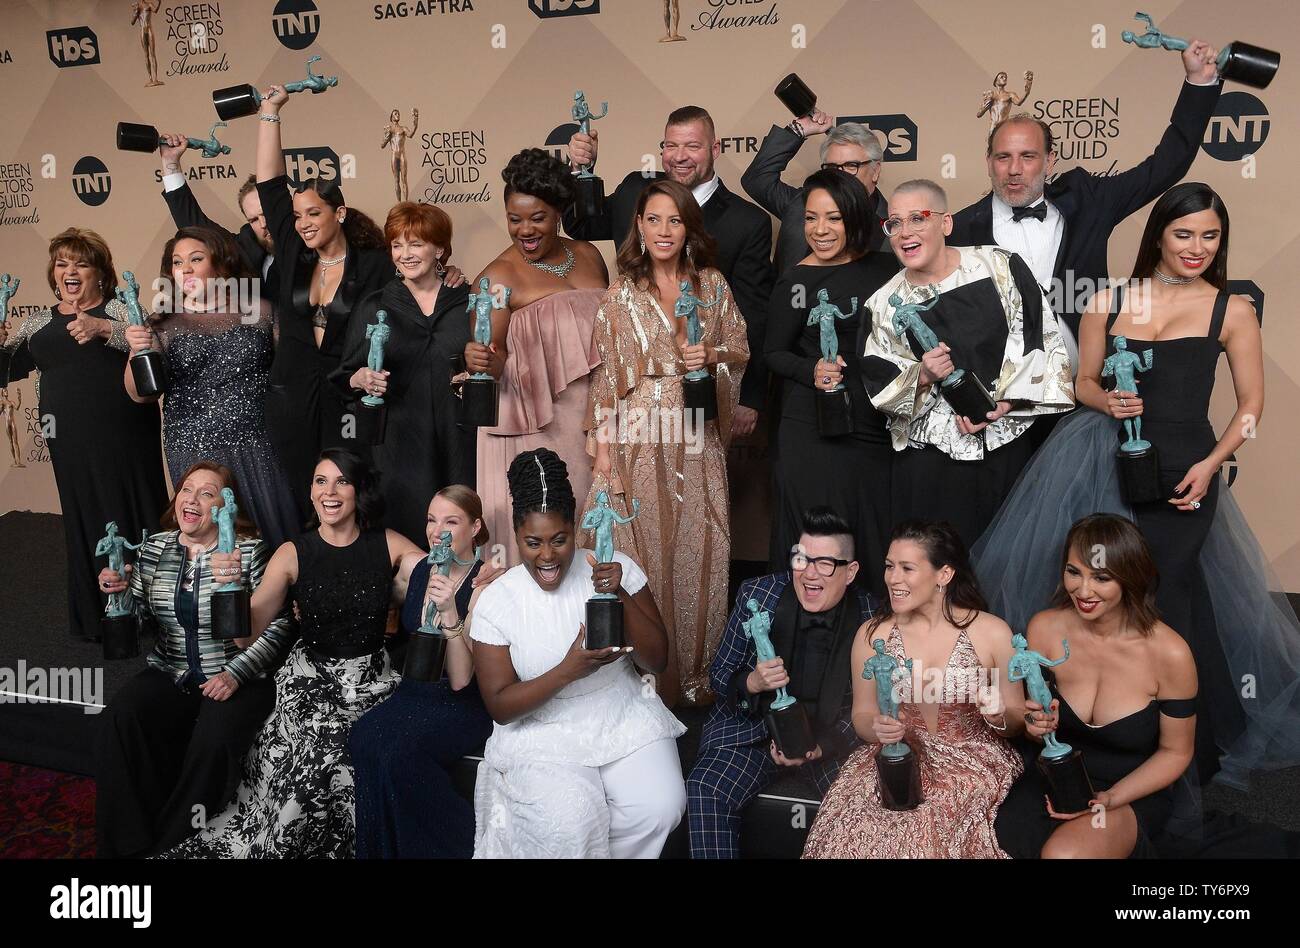 Orange Is The New Black Cast Members Appear Backstage With Their Award For Outstanding Performance By An Ensemble In A Comedy Series During The The 23rd Annual Sag Awards Held At The